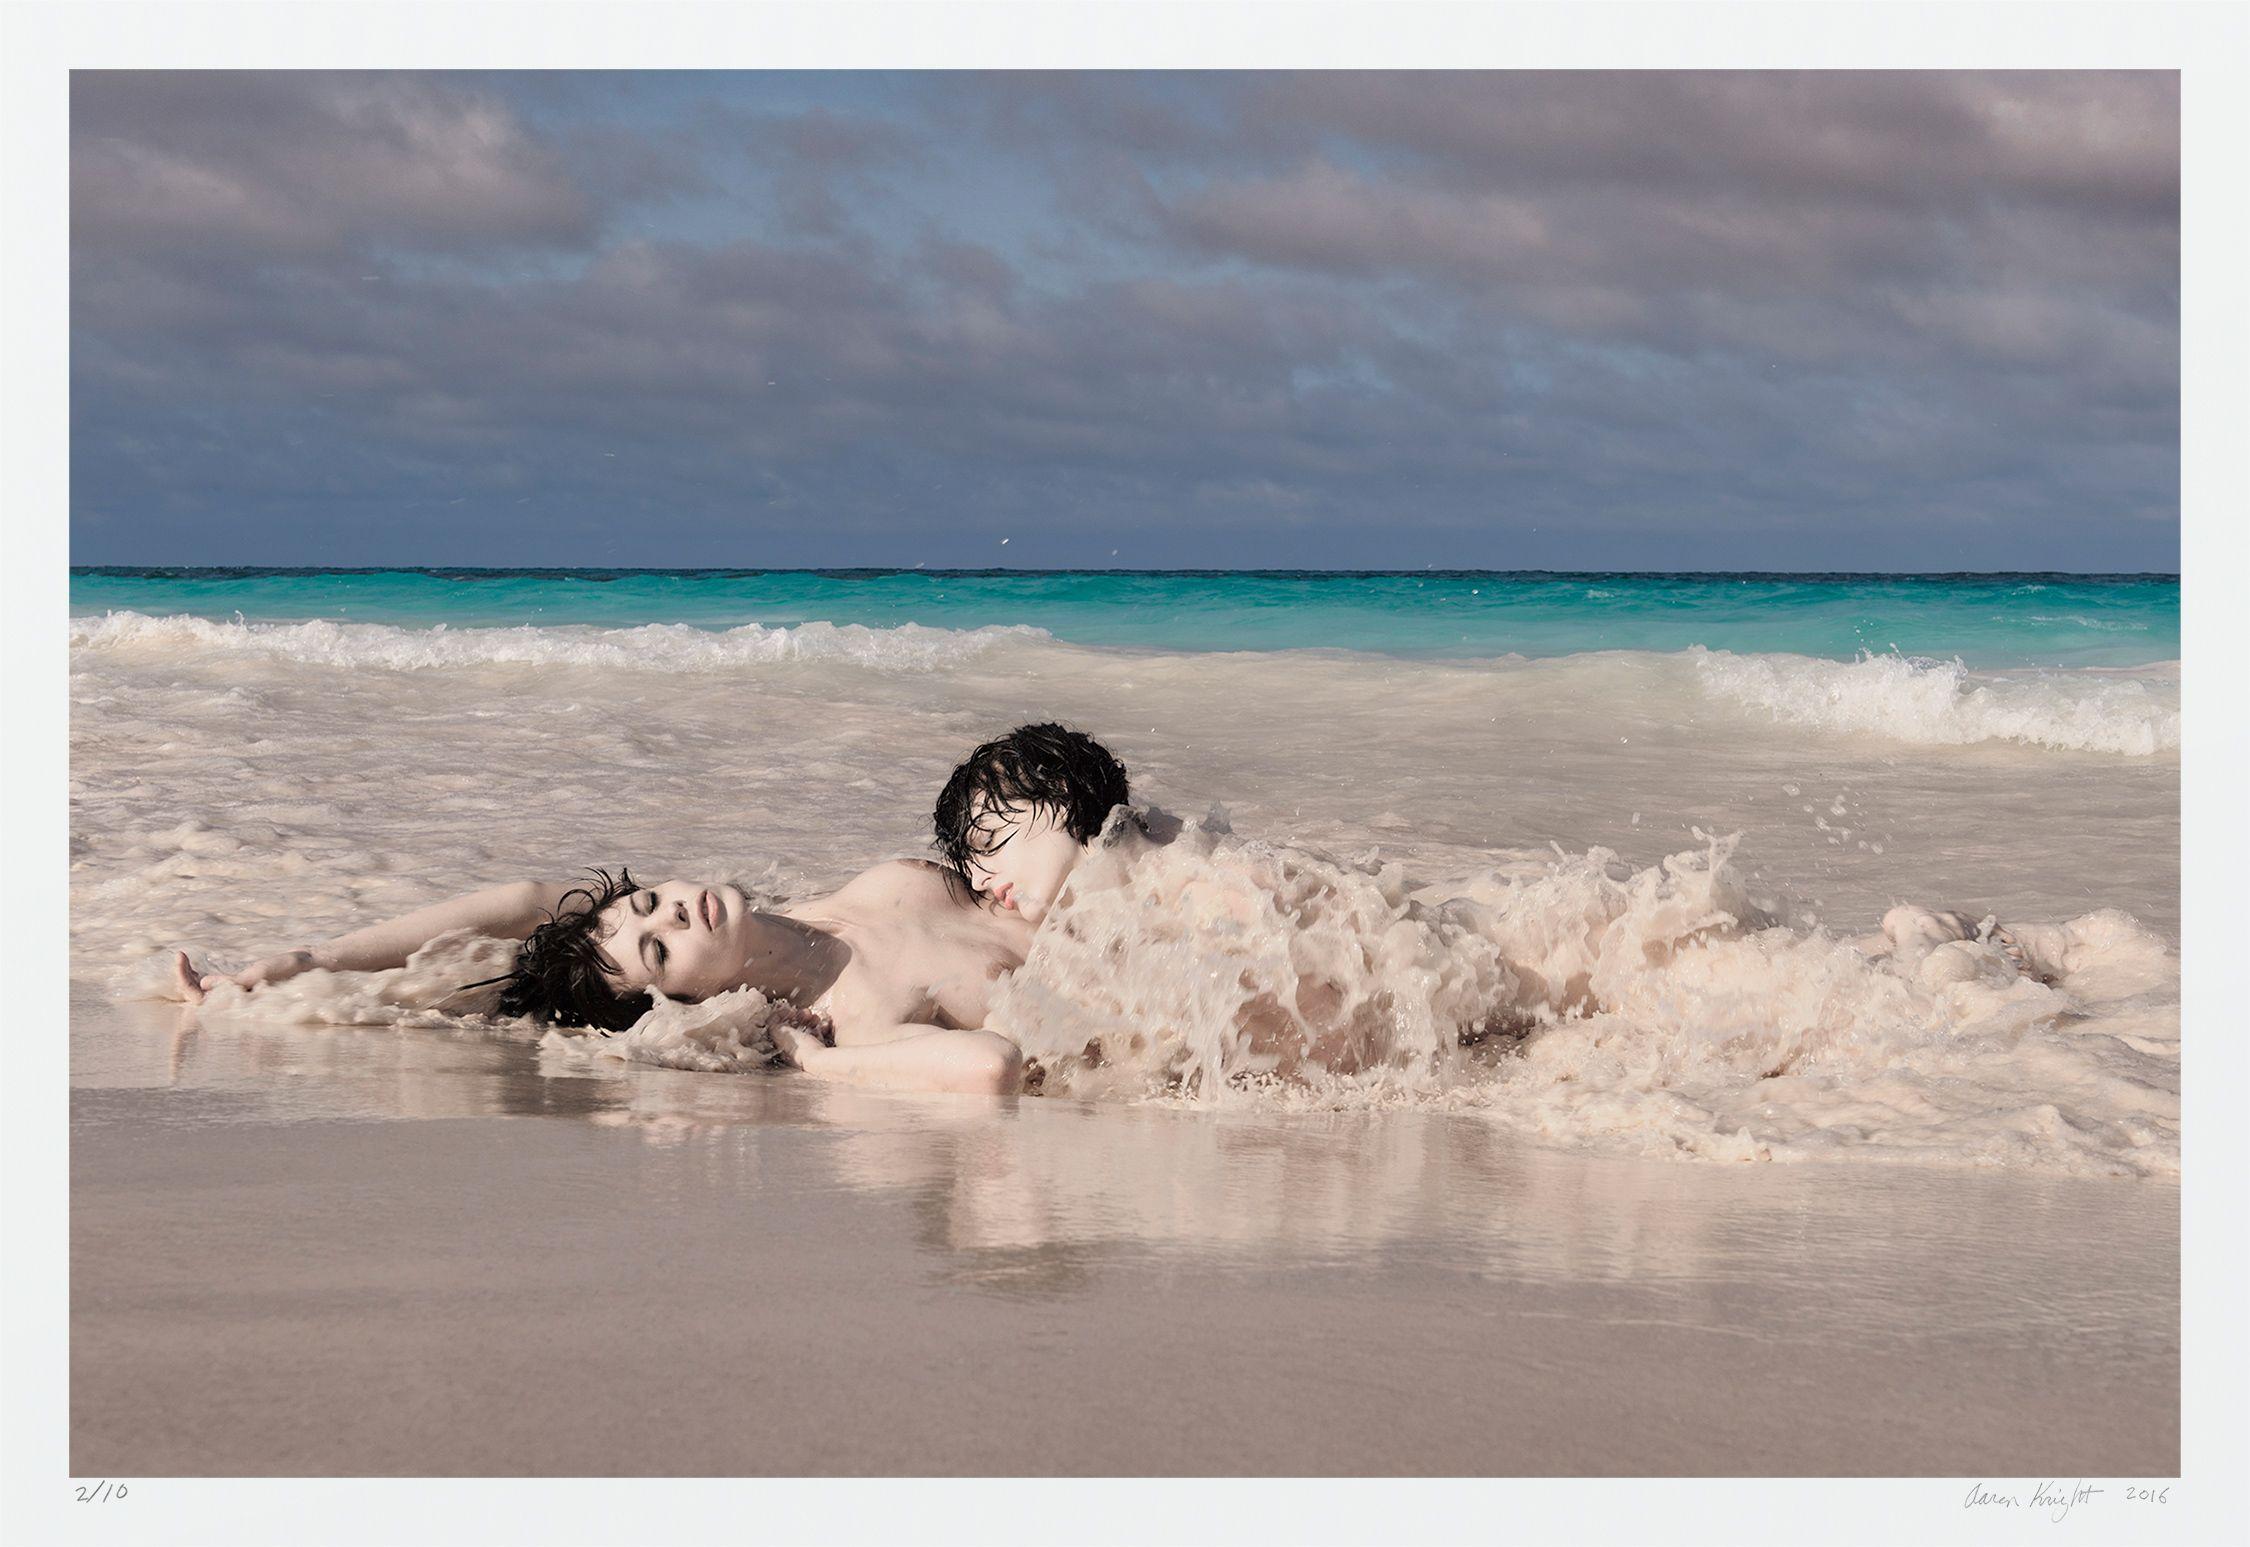 Aaron Knight Color Photograph - Surf Embrace 3/10, Photograph, Archival Ink Jet